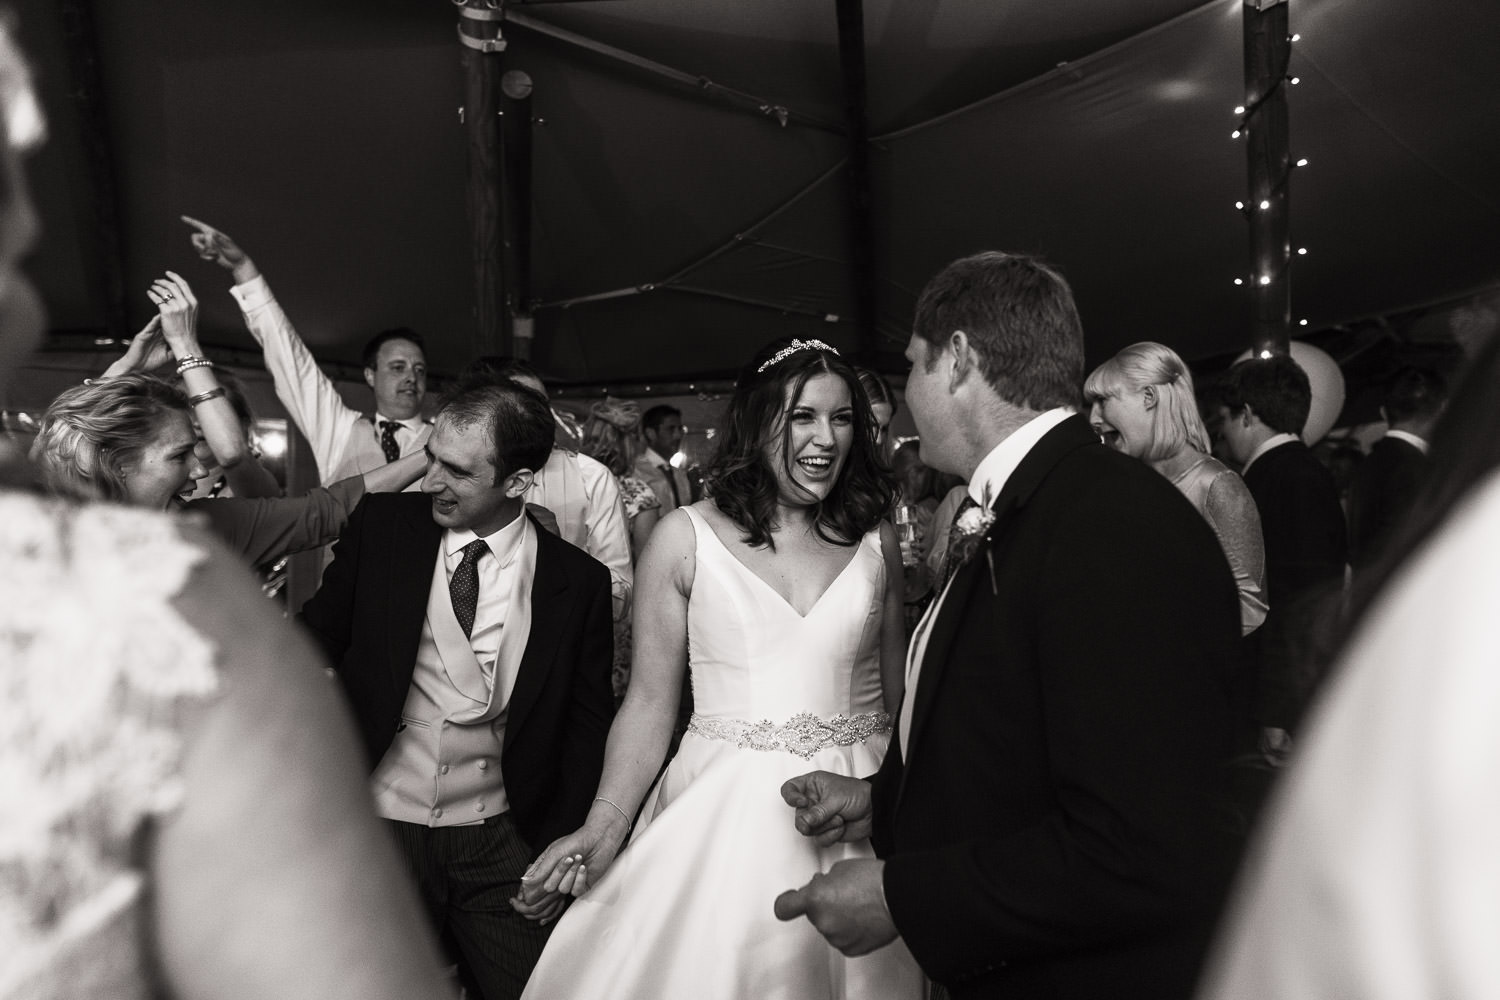 Bride and groom are dancing together in the middle of a packed dance floor.